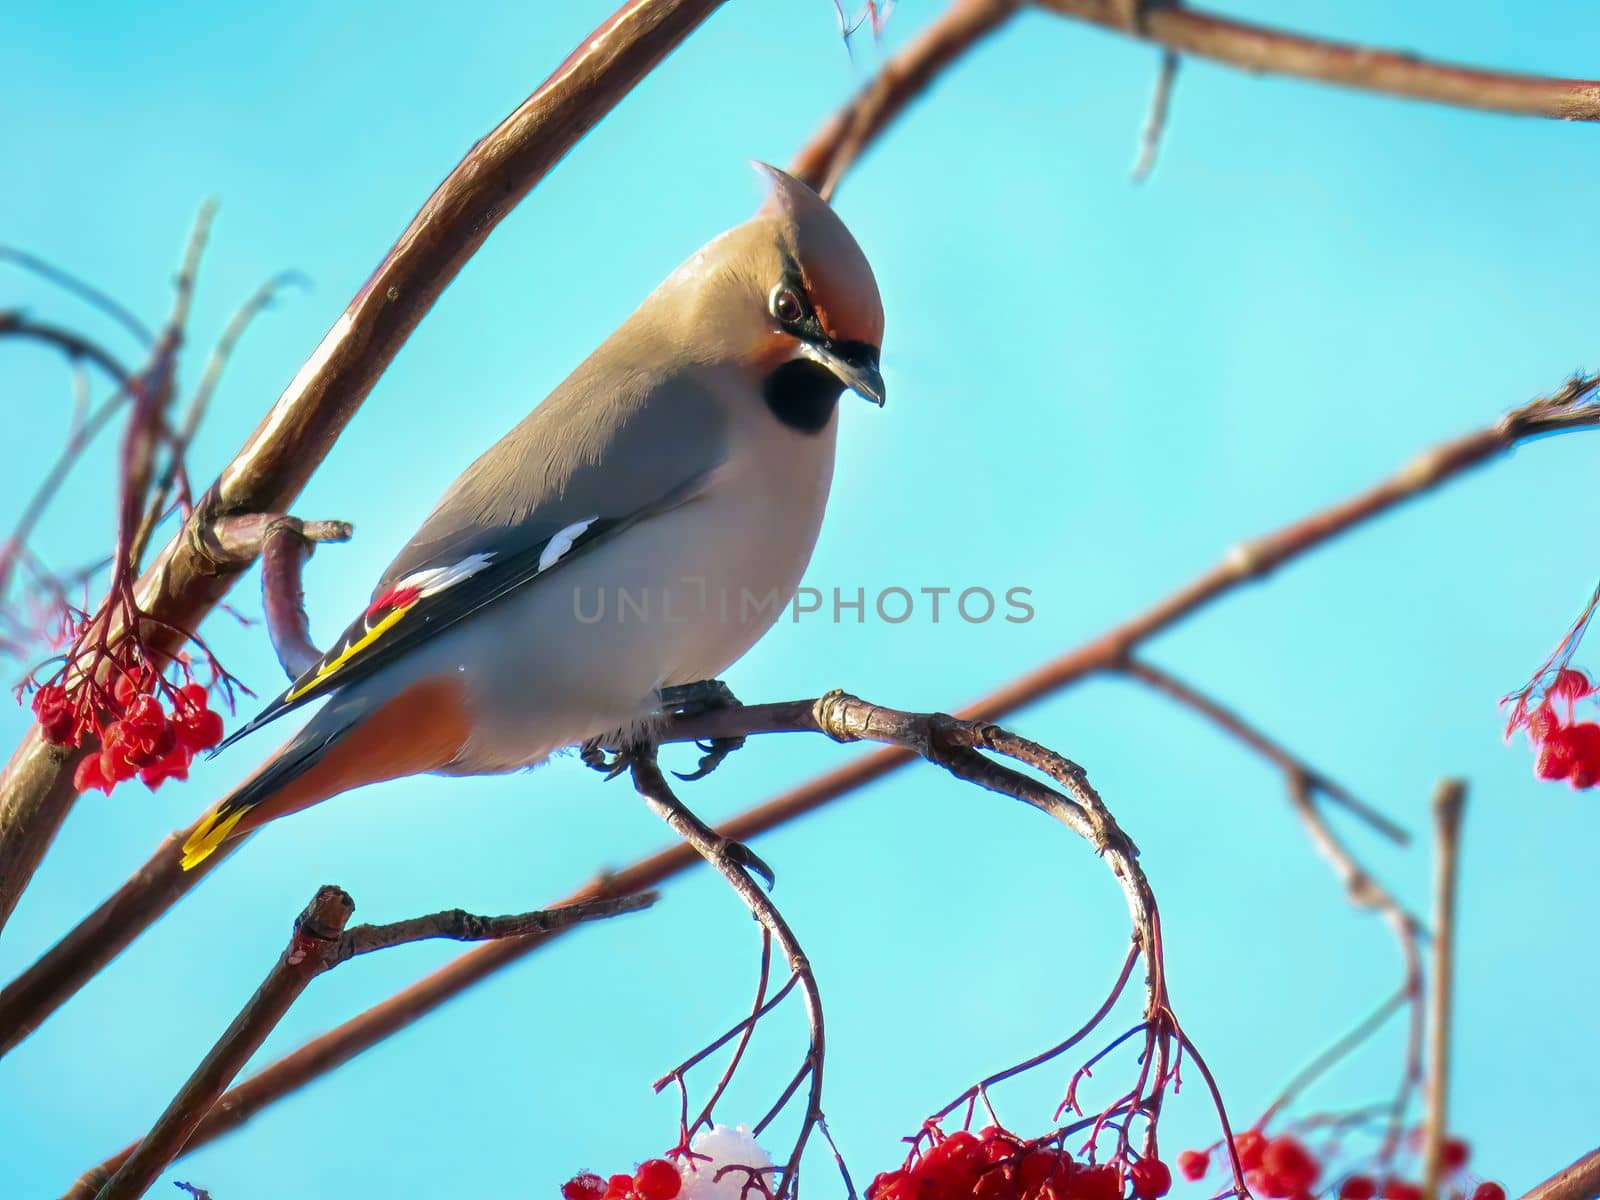 A Bohemian waxwing, starling-sized passerine bird that breeds in the northern forests of the Palearctic and North America. It has mainly buff-grey plumage, black face markings and a pointed crest. by oasisamuel